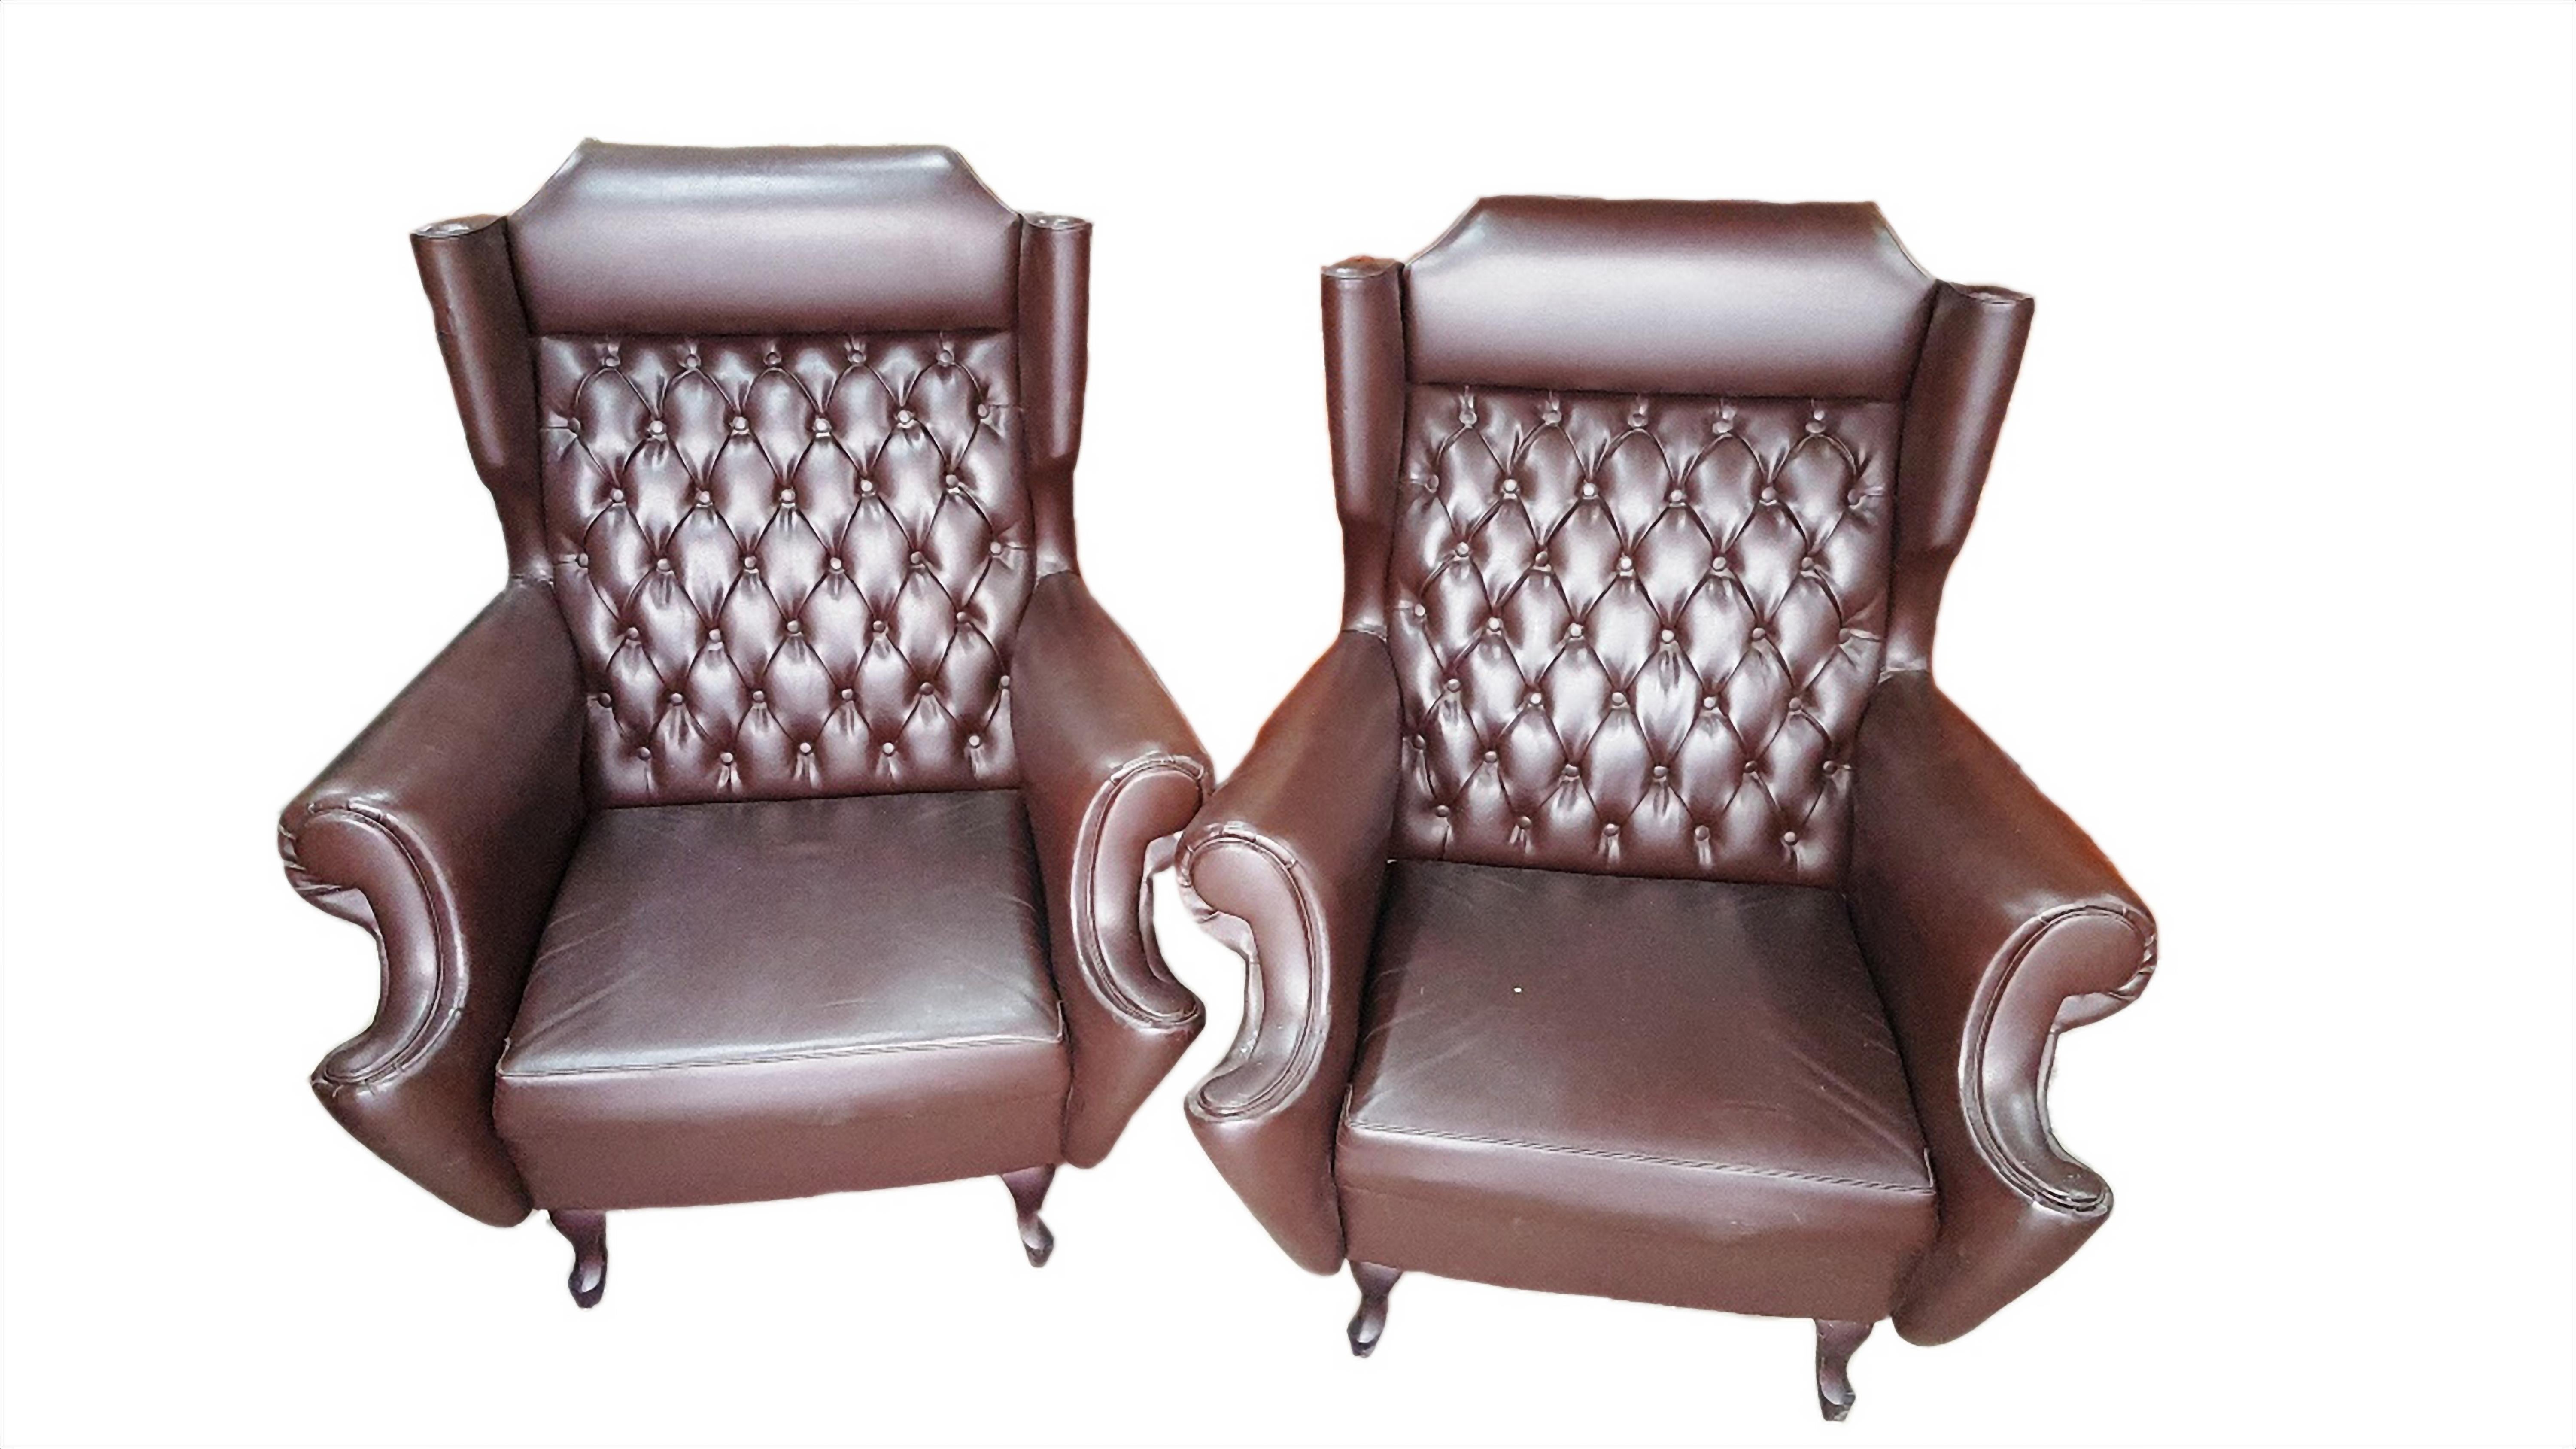 Pair of genuine leather armchairs. Vintage from the 1950s.